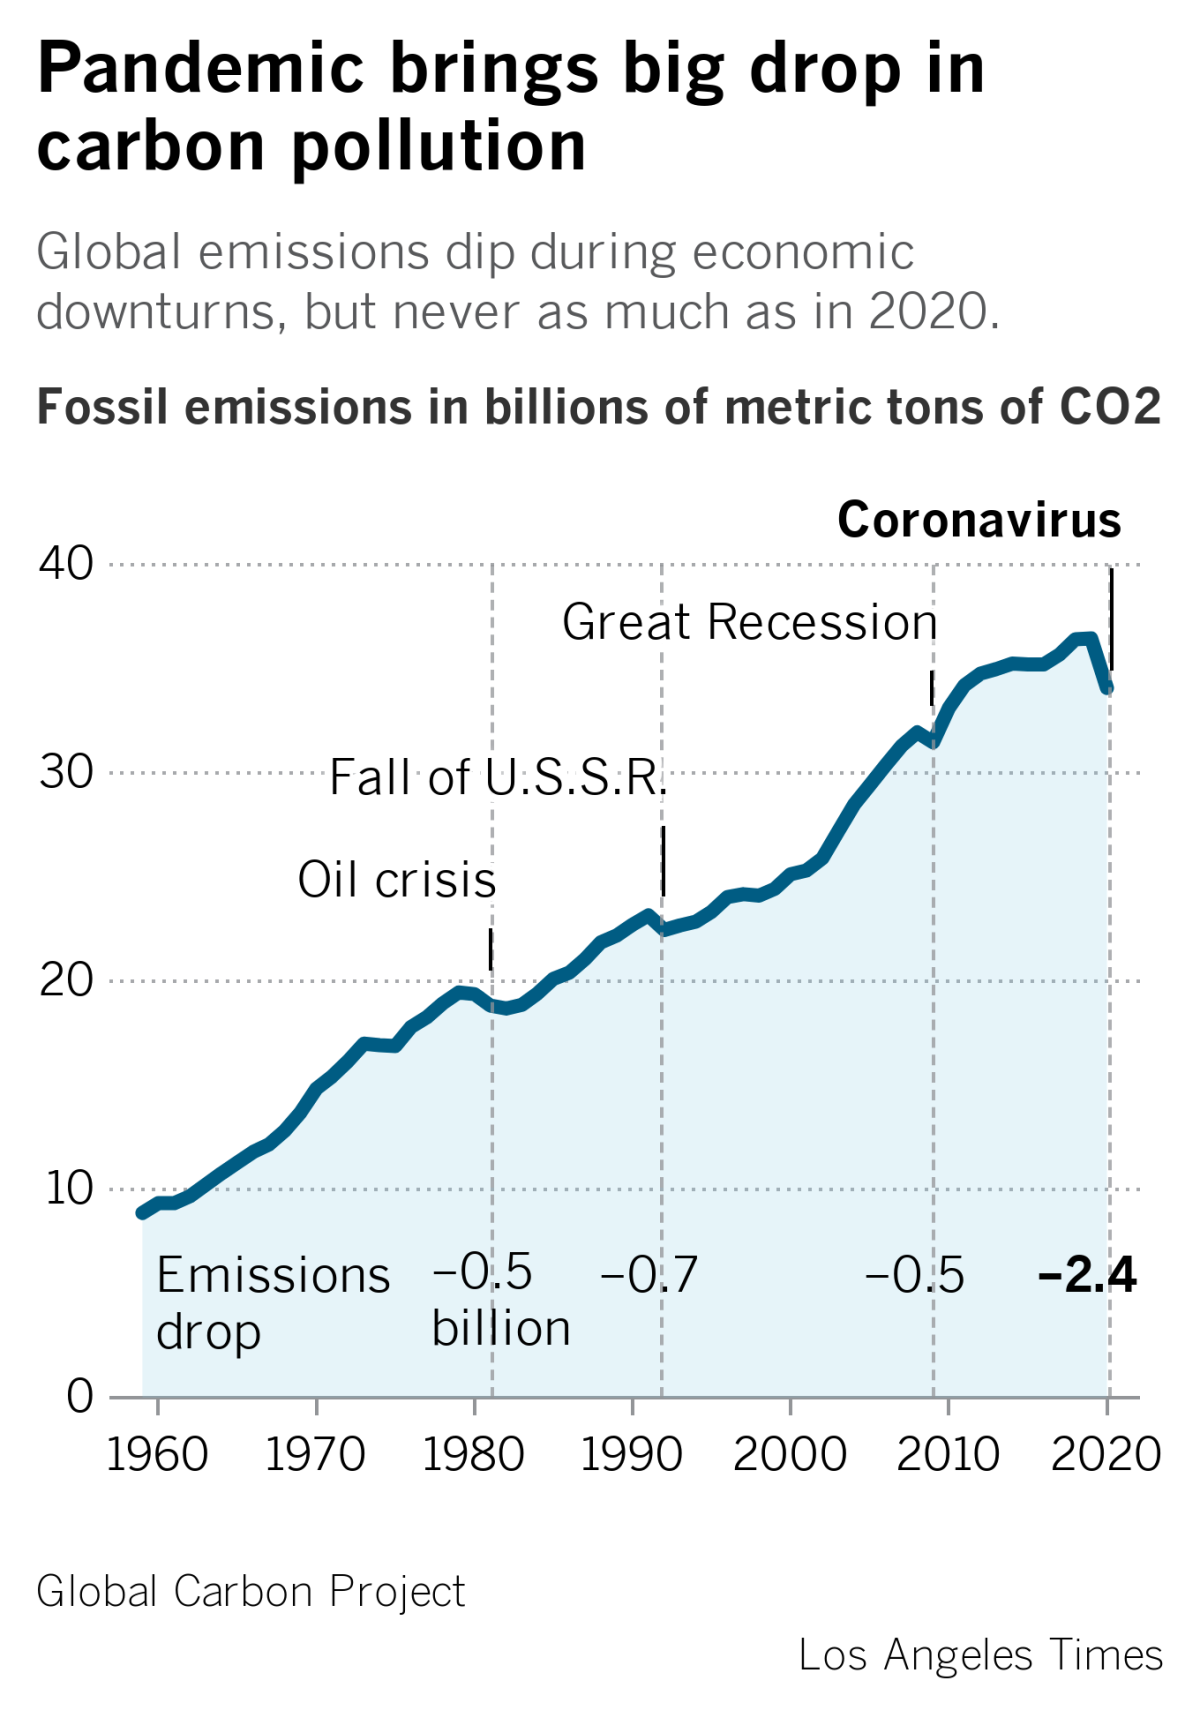 Chart shows global emissions climbing, but indicates dips after downturns such as during the Coronavirus.